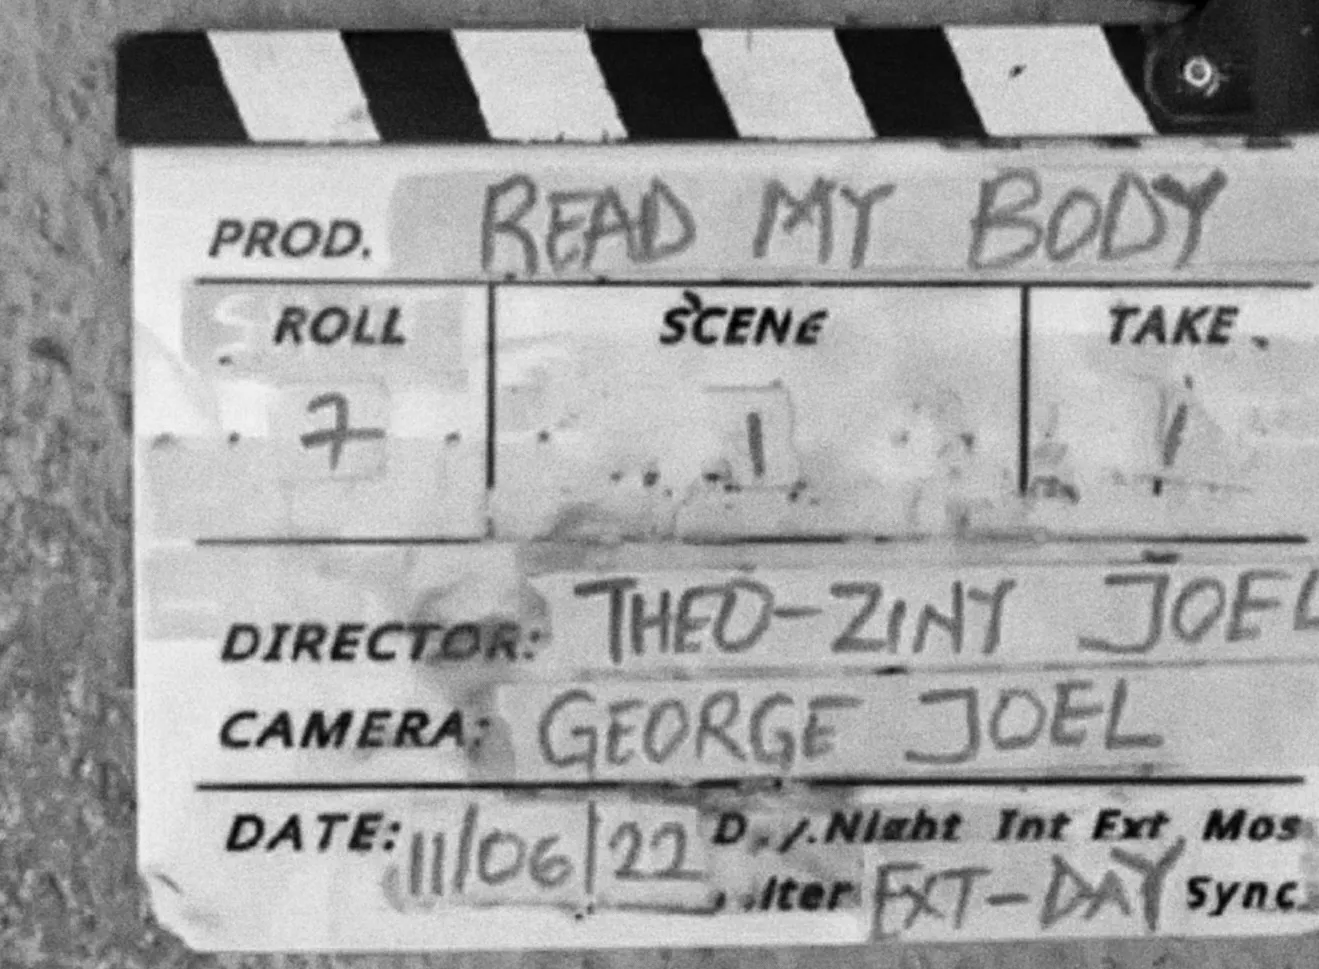 Clapperboard for Theo-Ziny Joel's shortlisted film Read My Body 